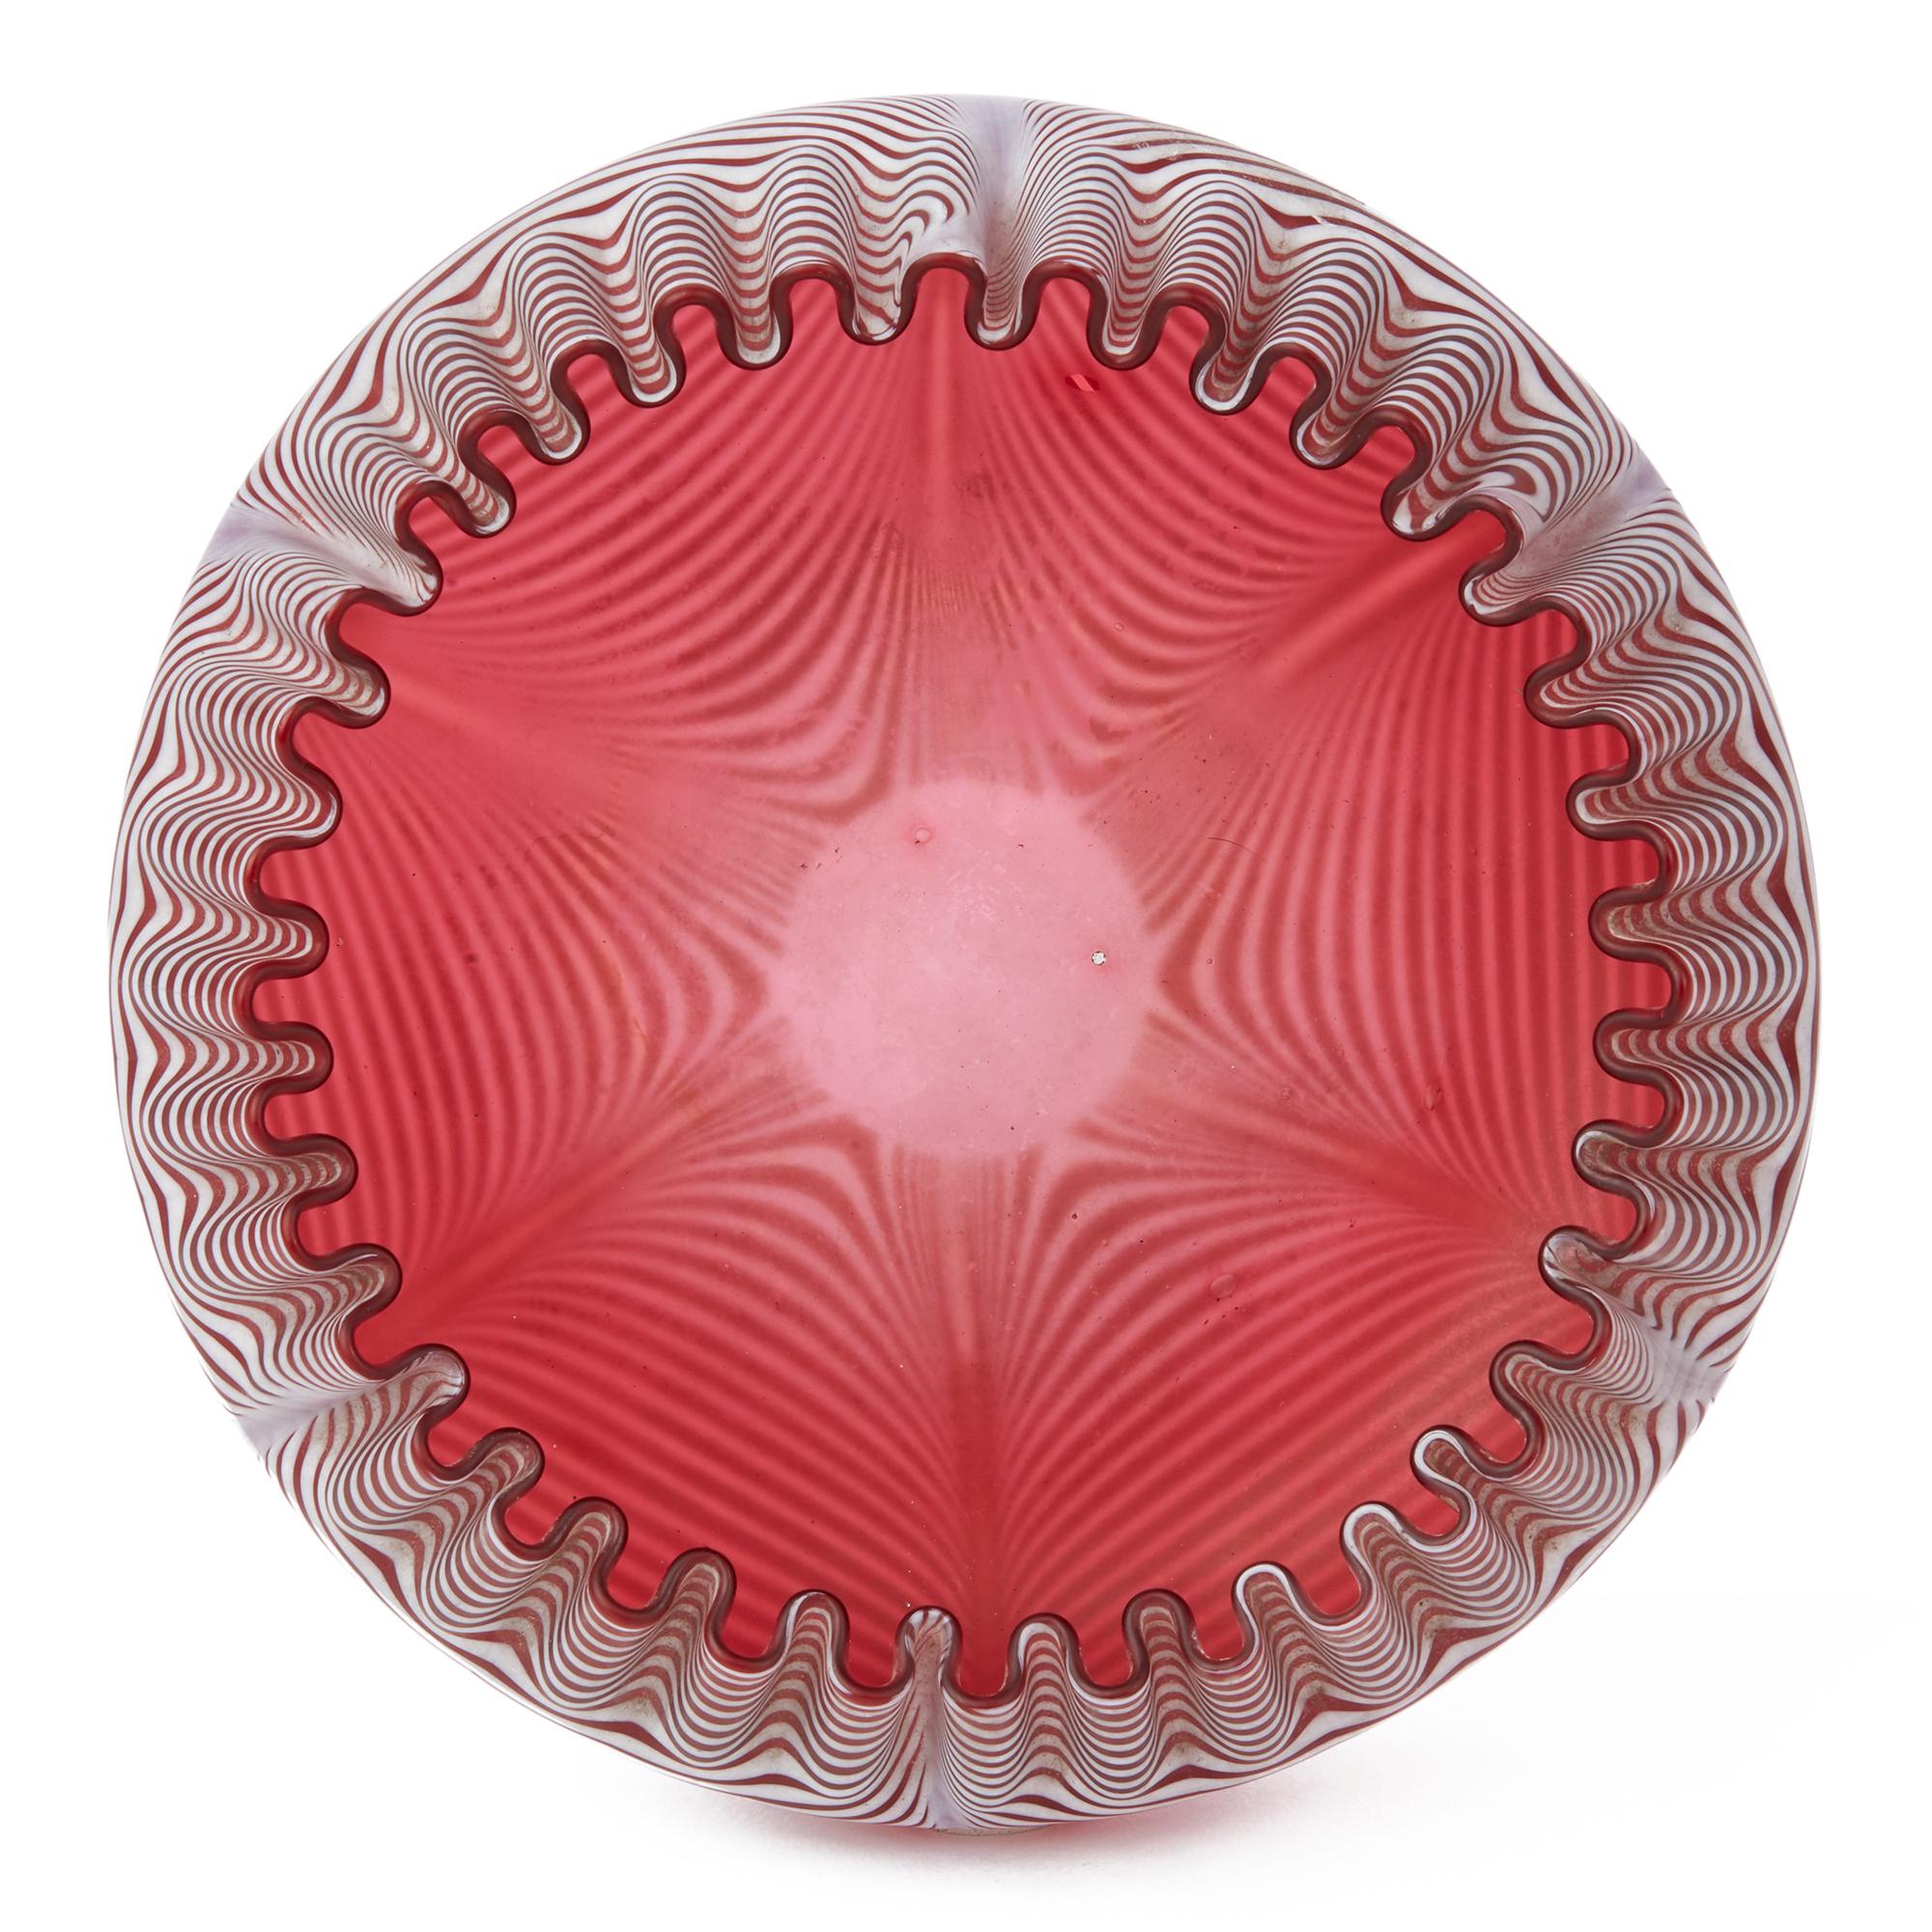 An exceptional antique cranberry glass verre moire bowl attributed to Thomas Webb and dating from circa 1890. The shallow rounded bowl has a fine and evenly crimped rim with Fine and even white patterned threading trailed through the cranberry glass